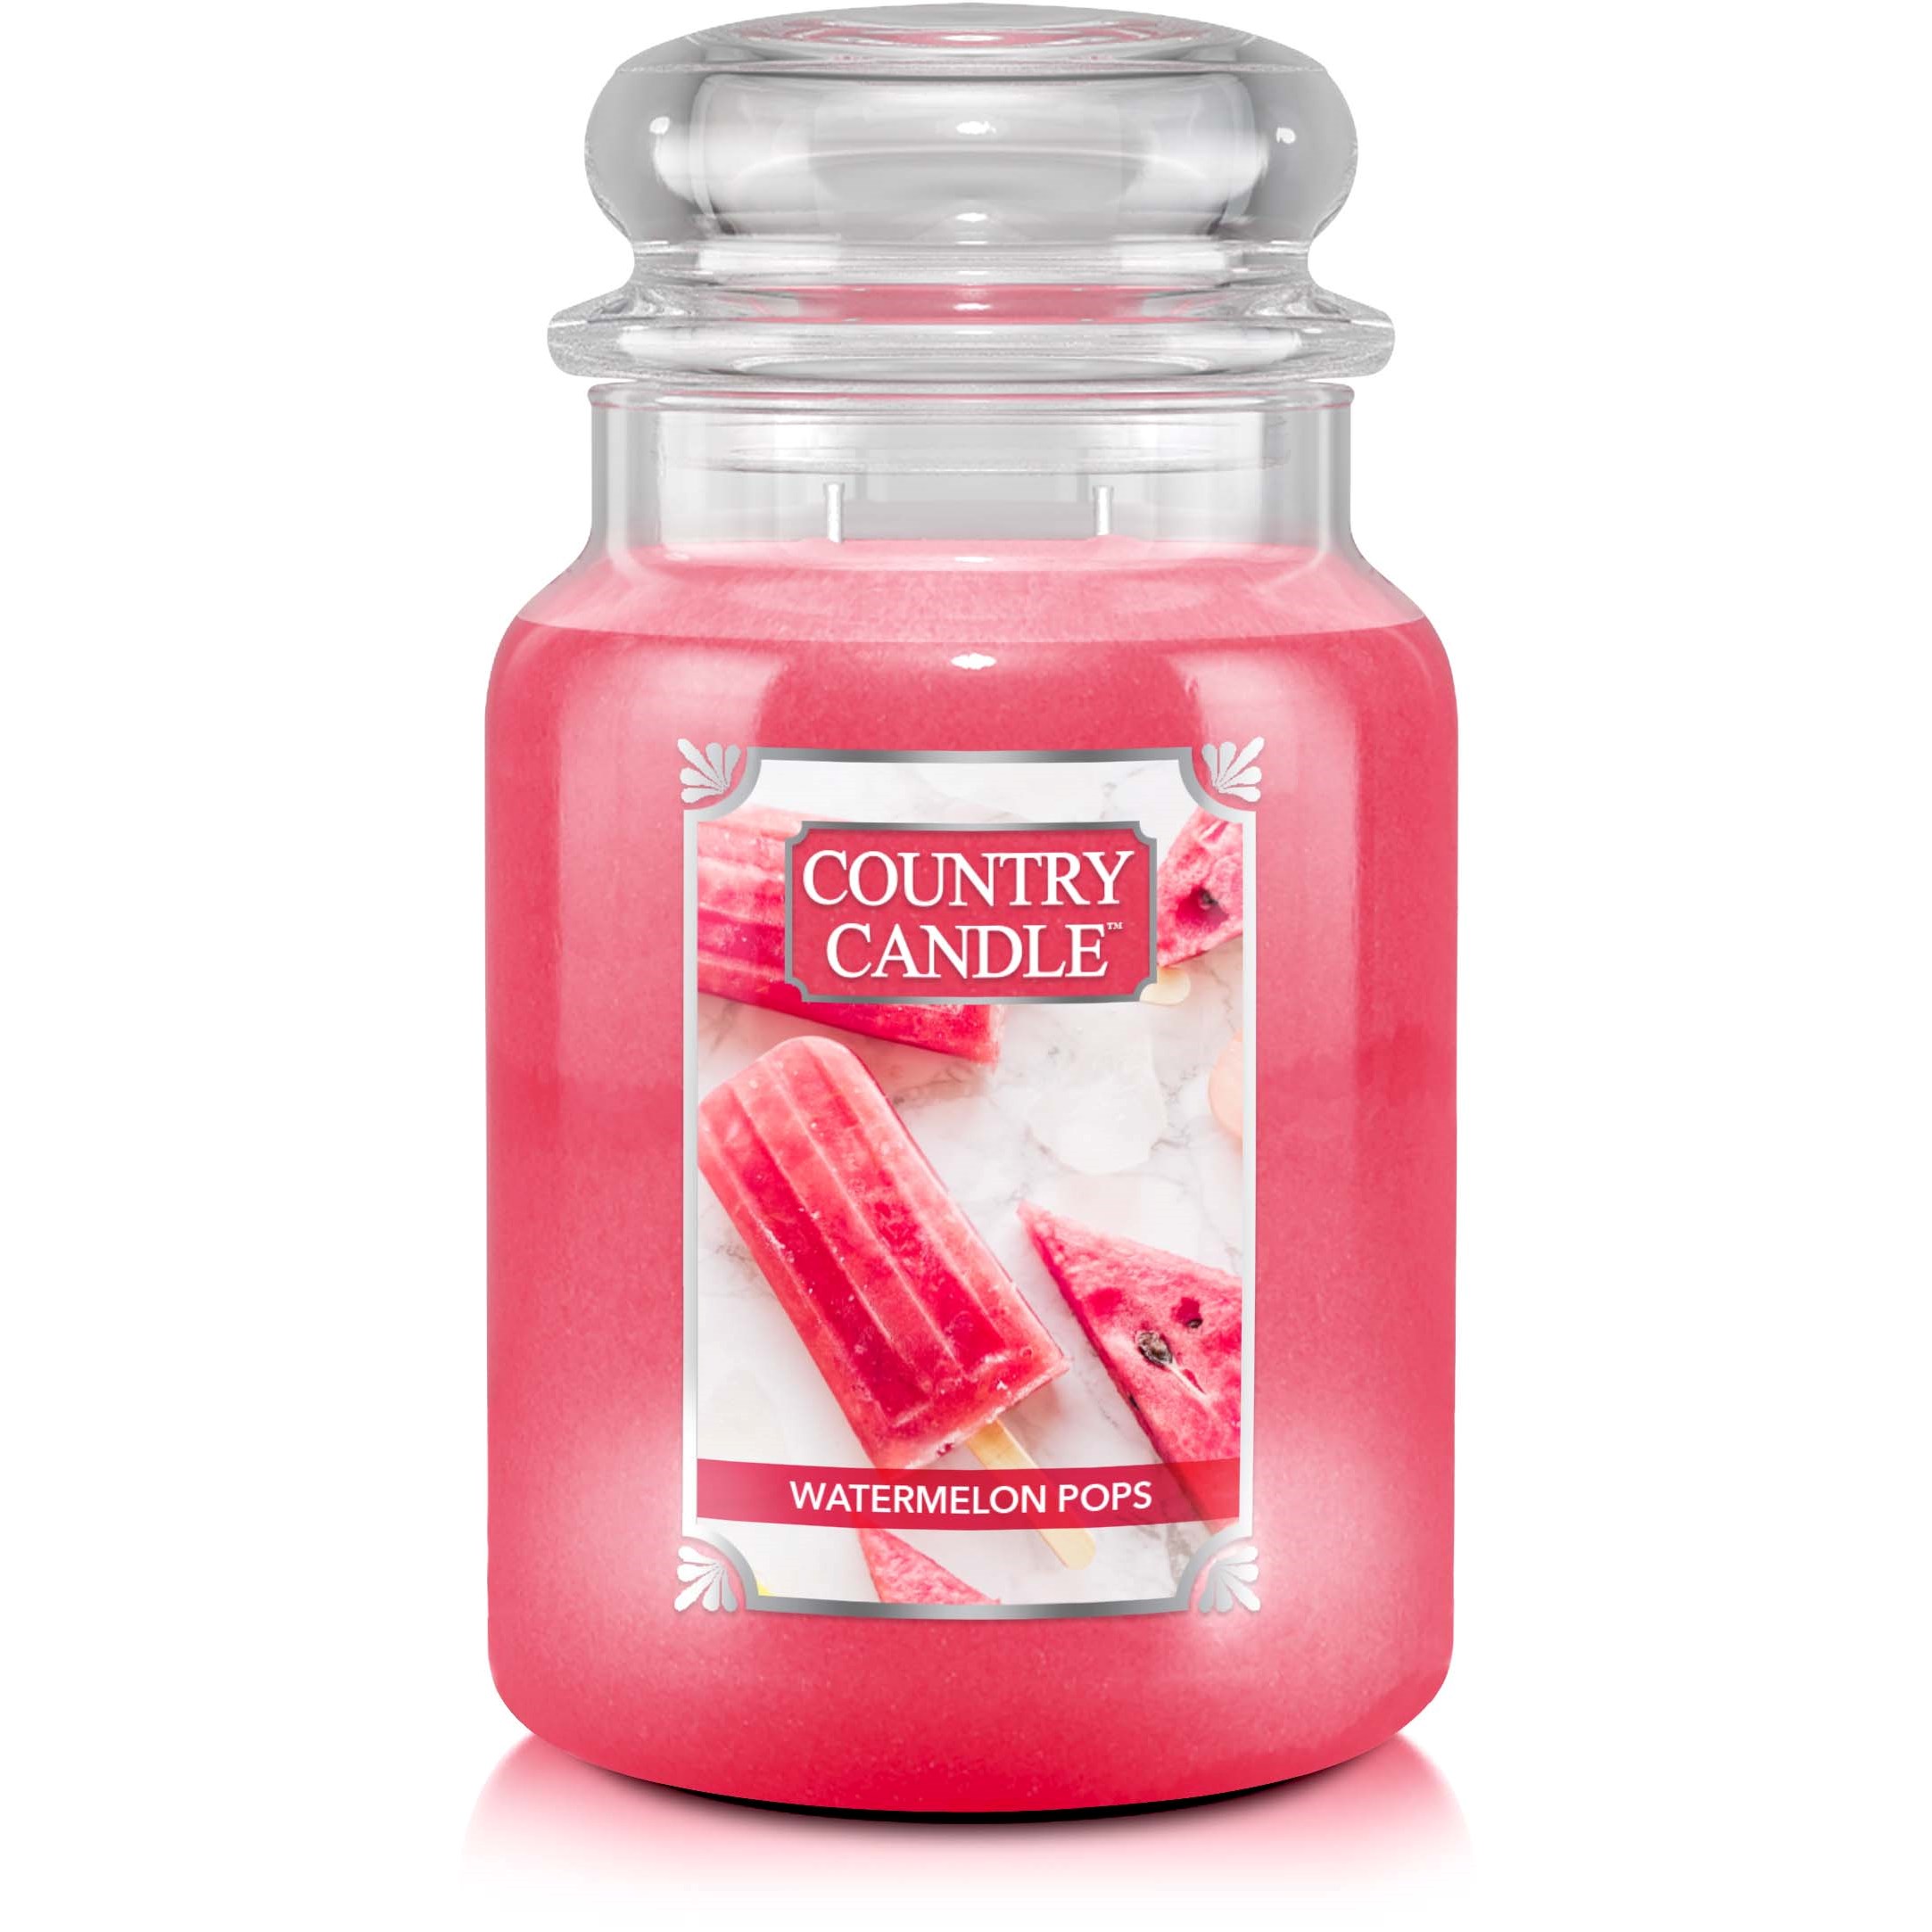 Country Candle Large Jar Watermelon Pops 652 g